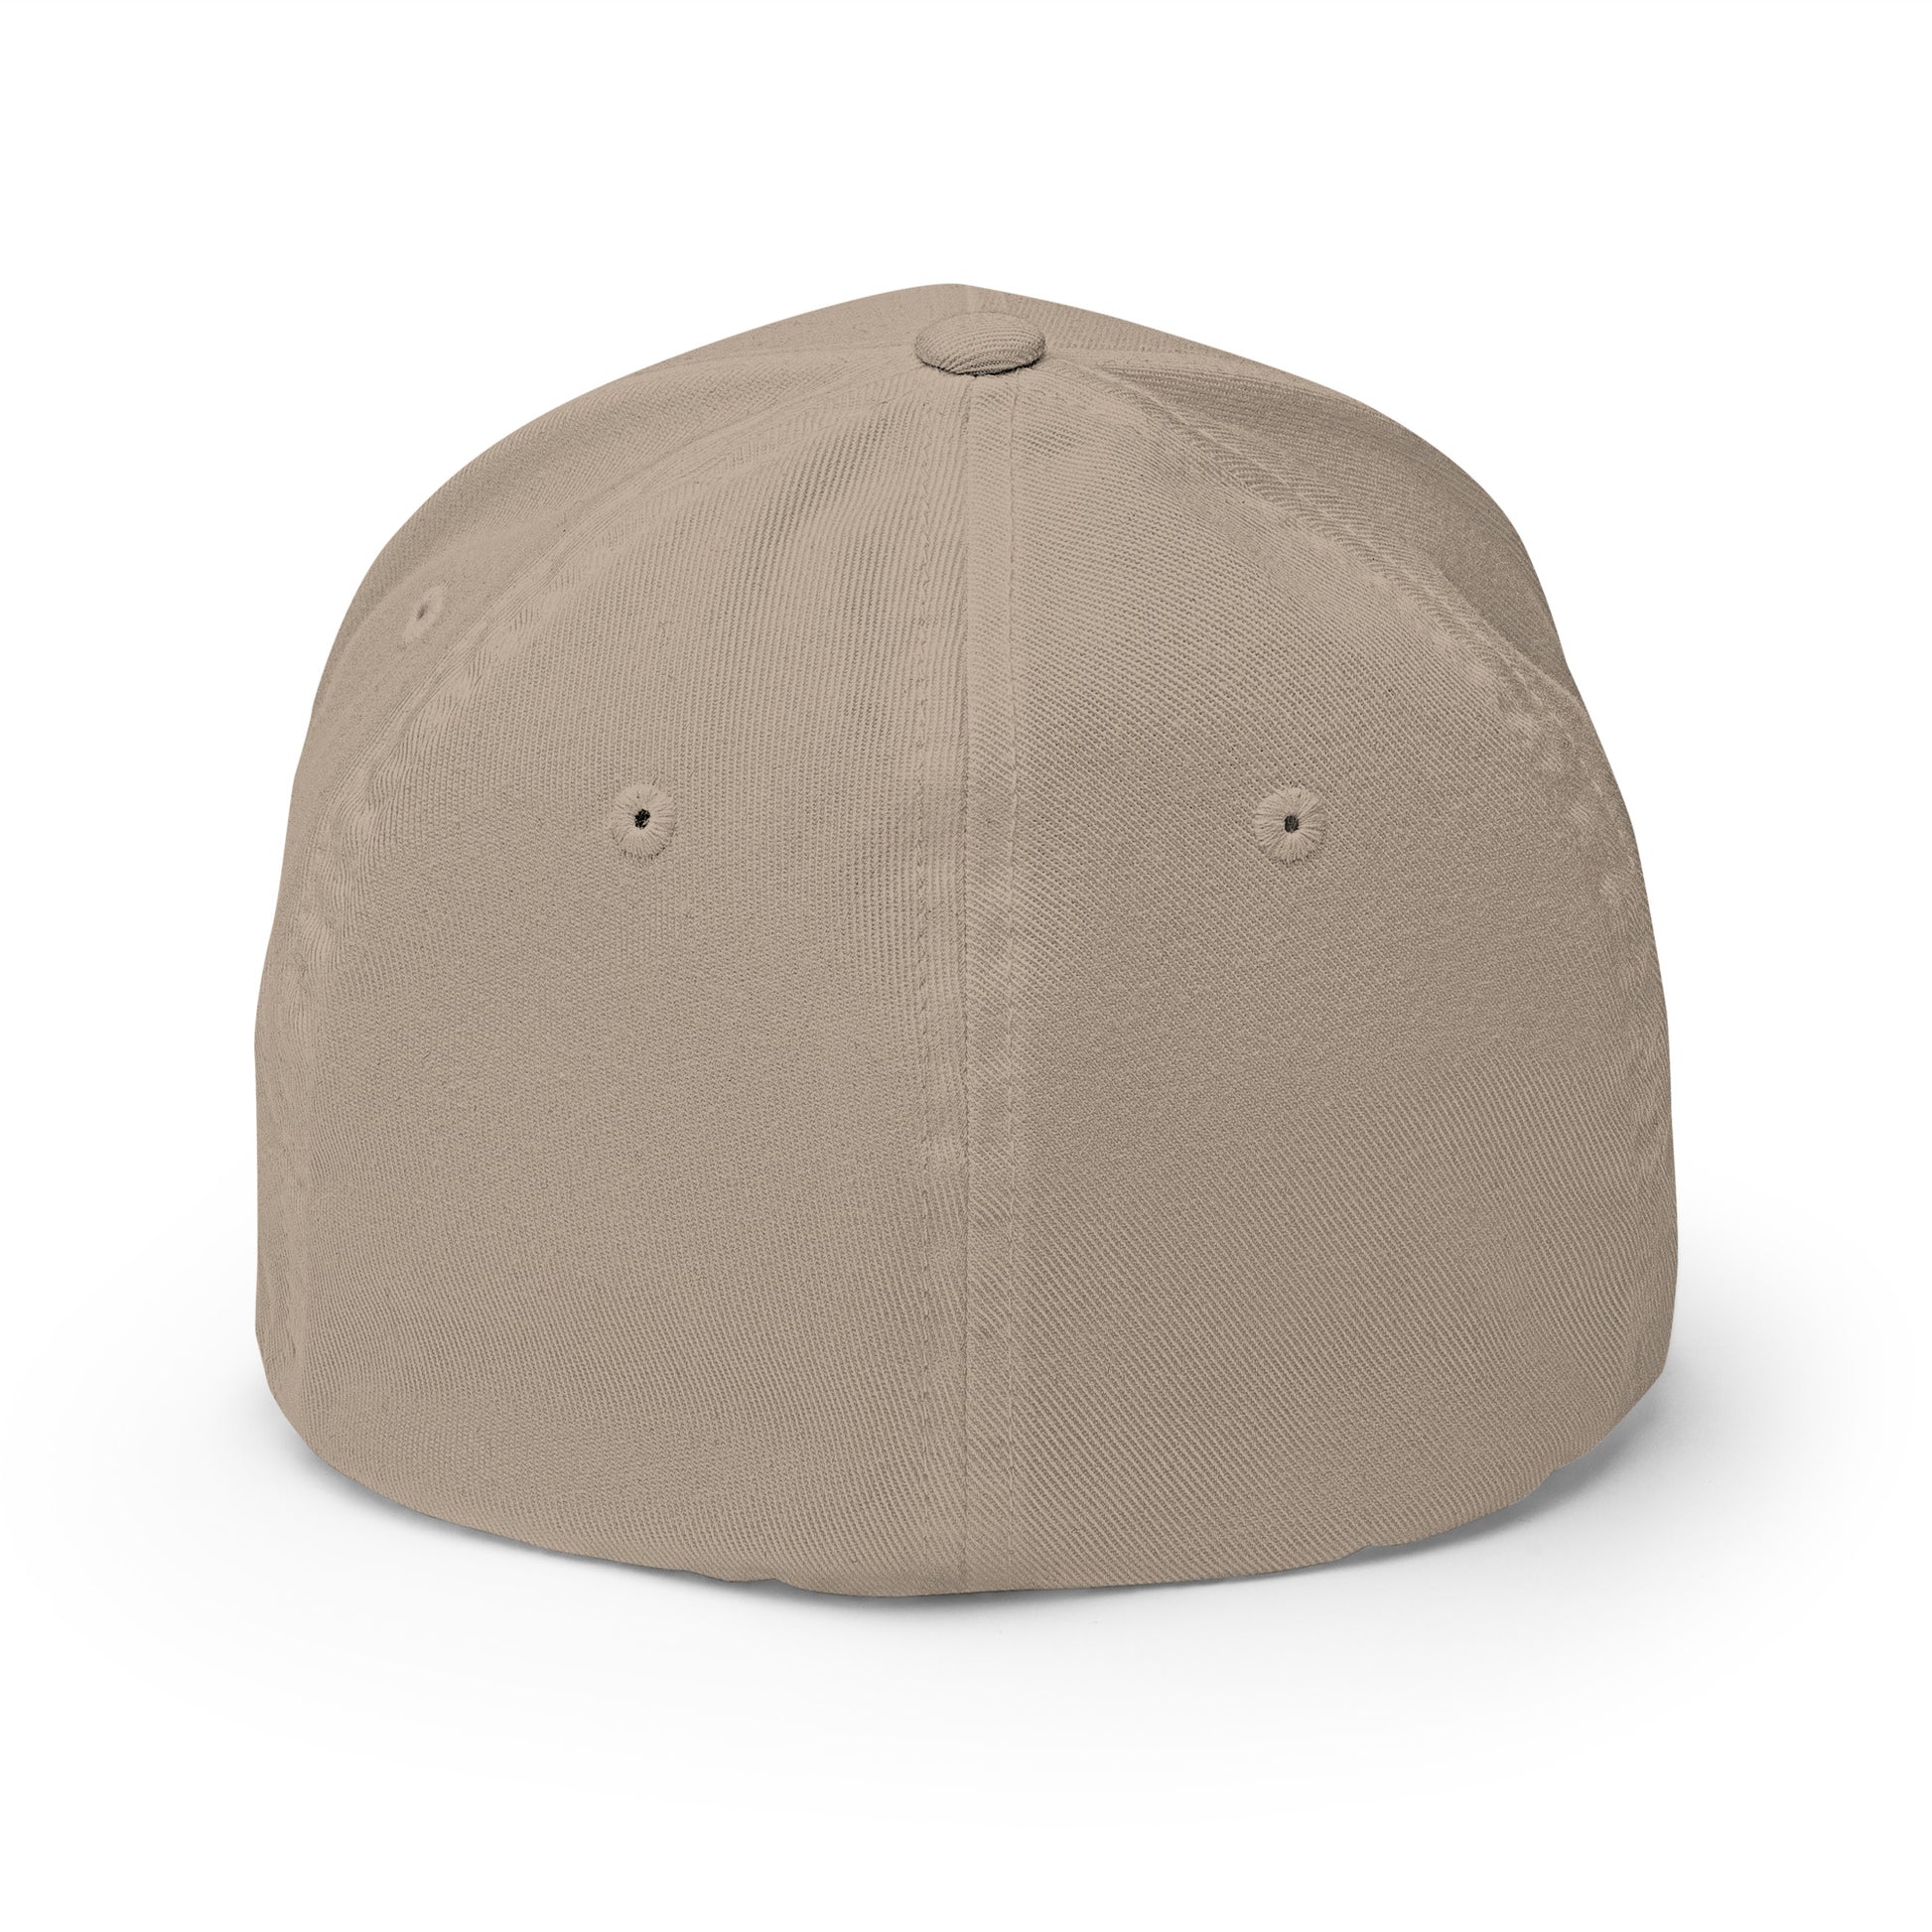 cap-from-the-back-with-geometric-shape-symbol